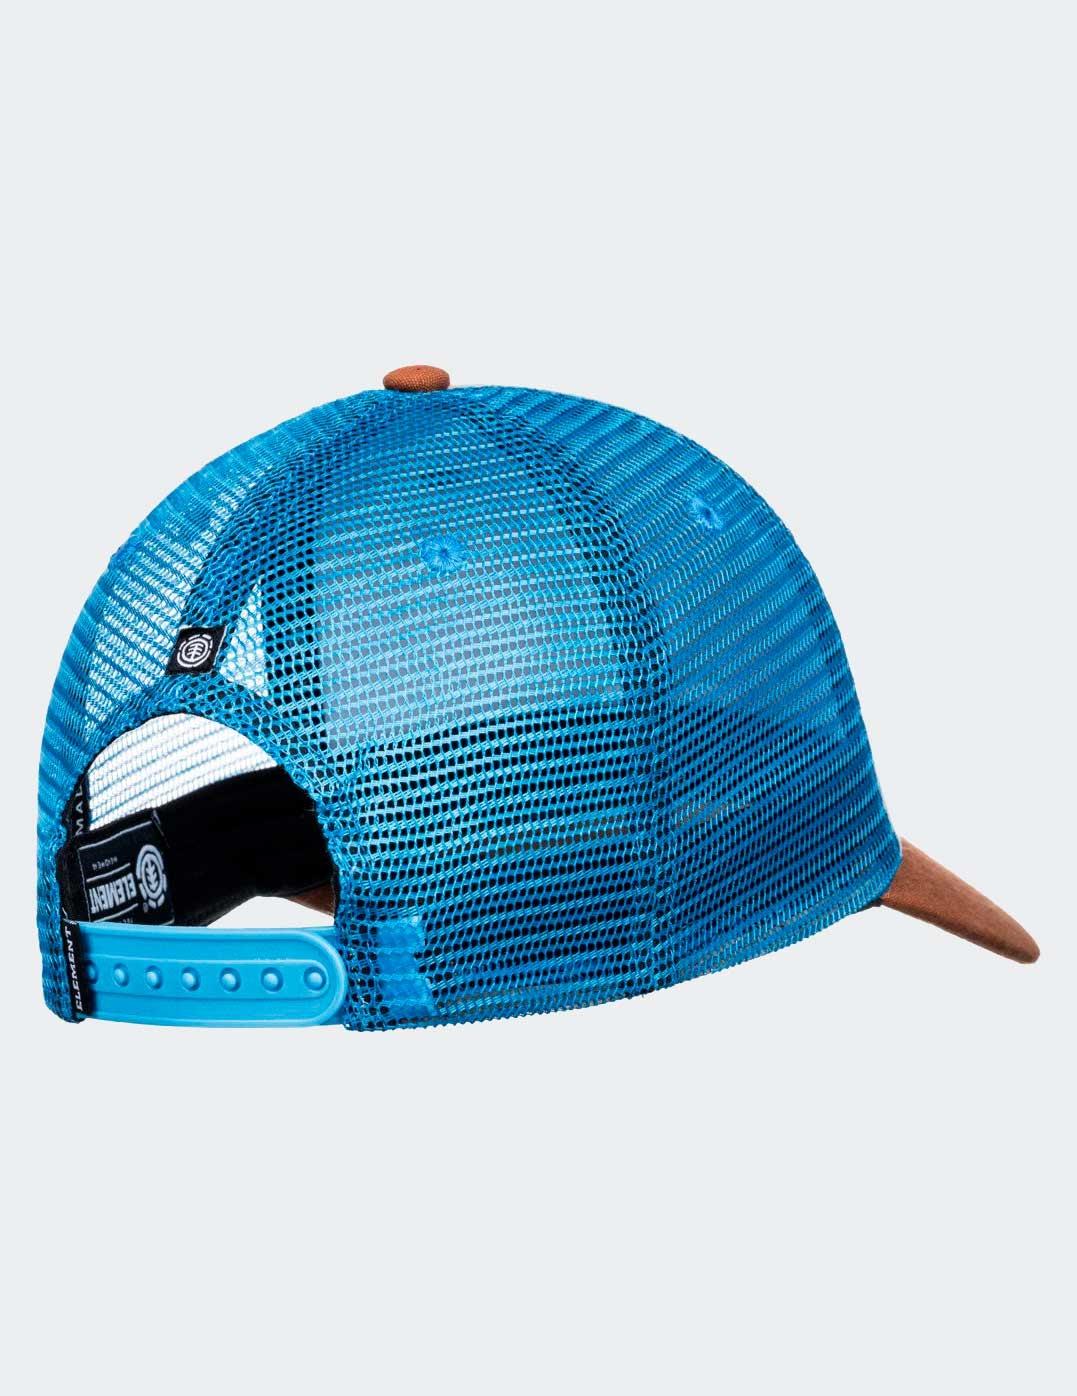 Gorra ELEMENT ICON MESH  - Pussywillow Gry